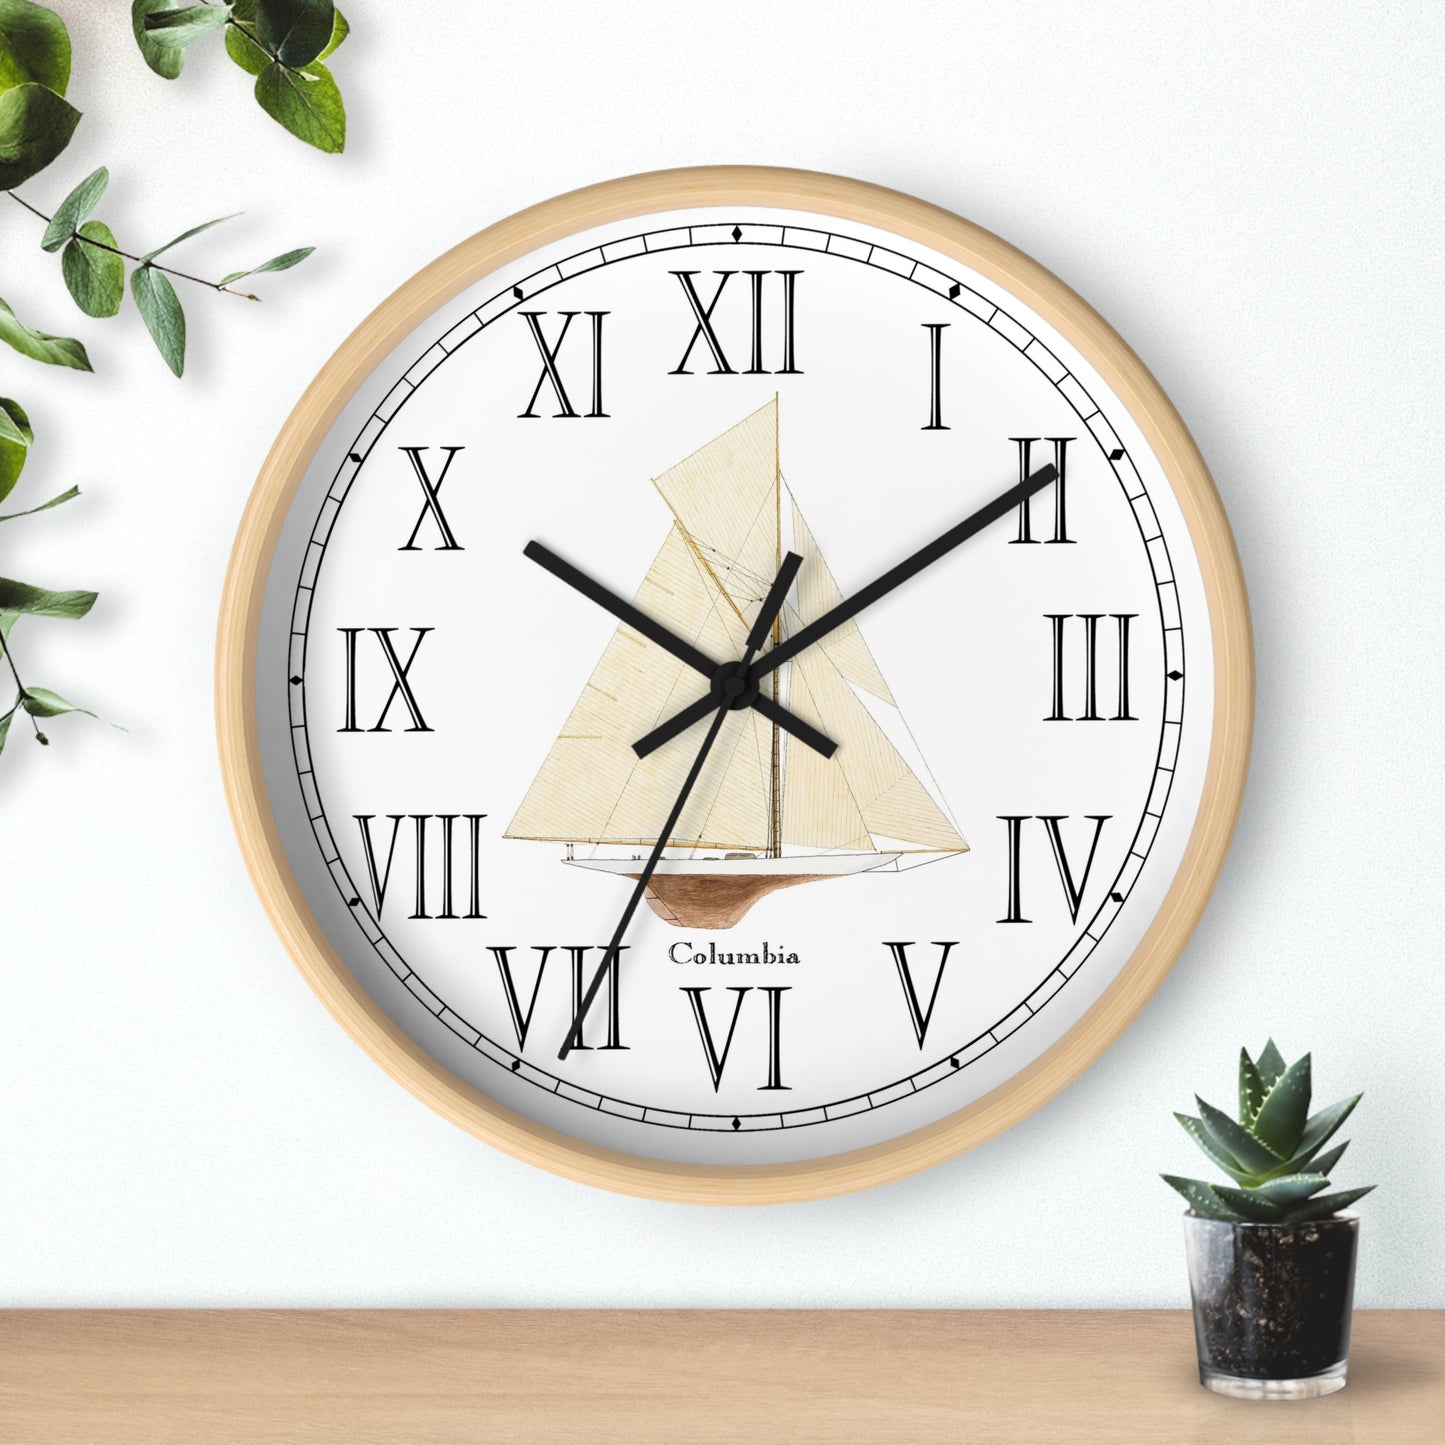 The Columbia was an America's Cup Racer. The Columbia Roman Numeral Clock will add a classic touch to any room, and is a perfect choice for anyone who loves sailing or naval history.